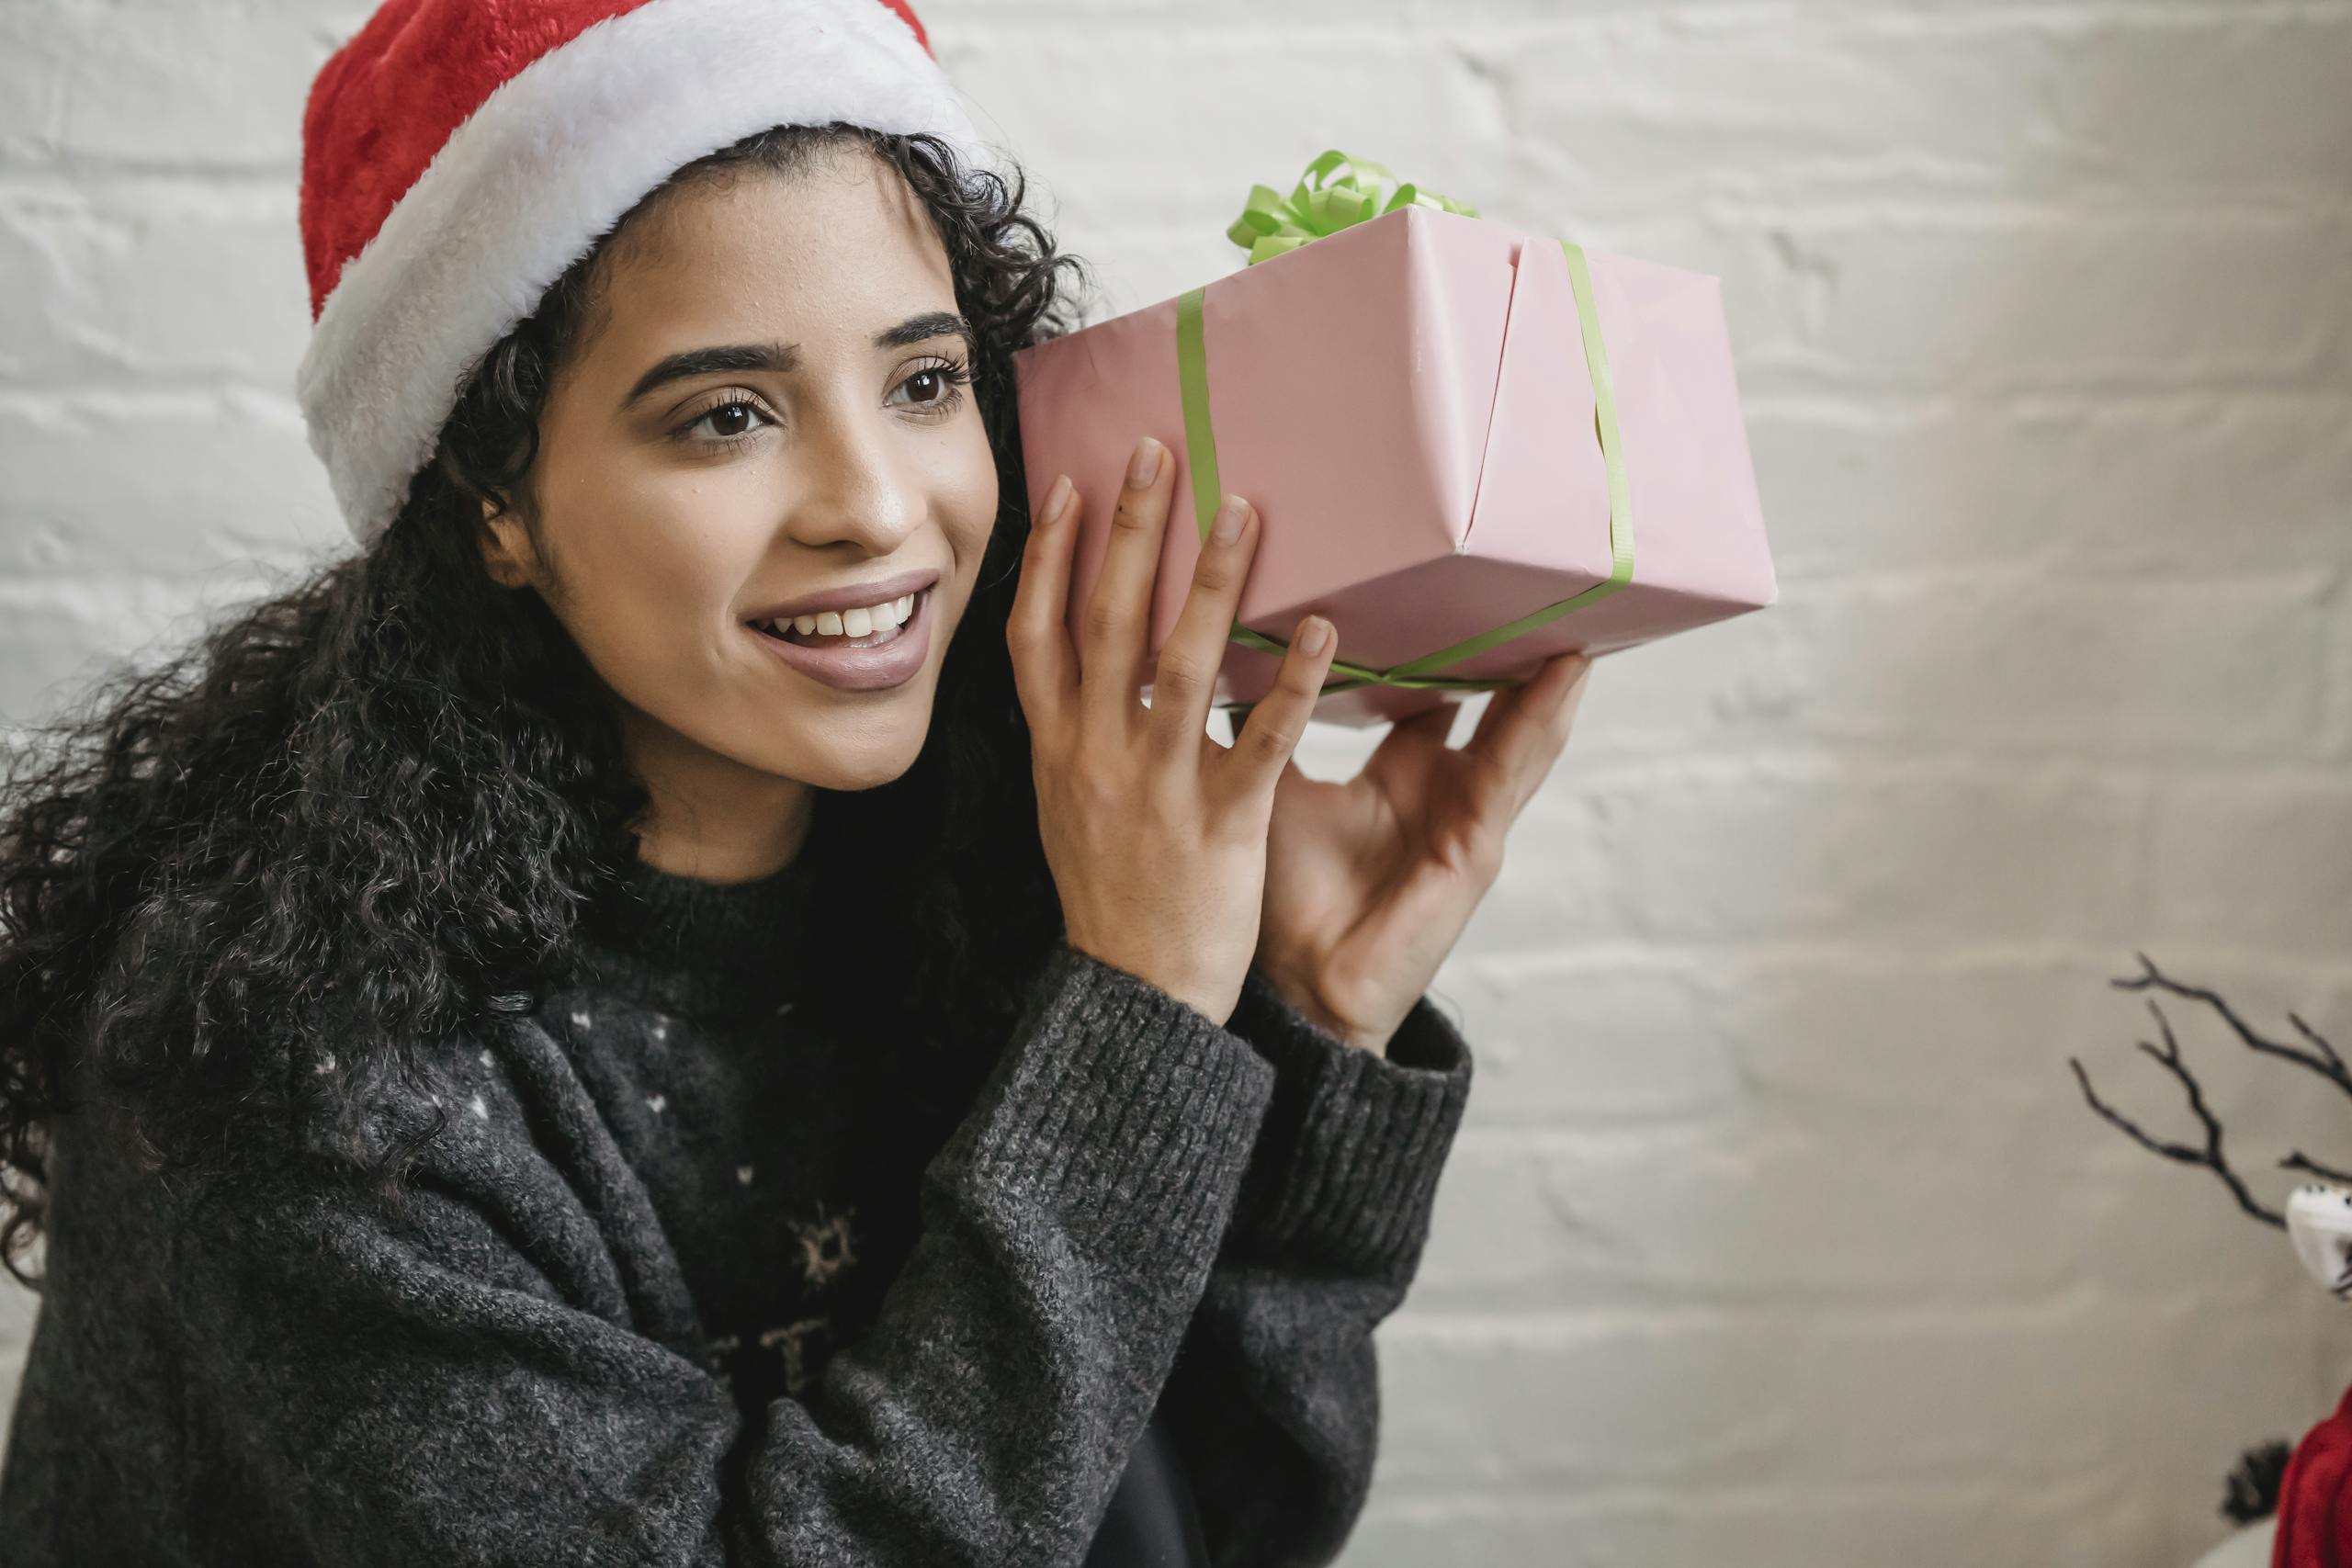 Smiling young ethnic female with curly hair wearing Santa hat and holding wrapped gift box near ear while looking away in excitement during Christmas party